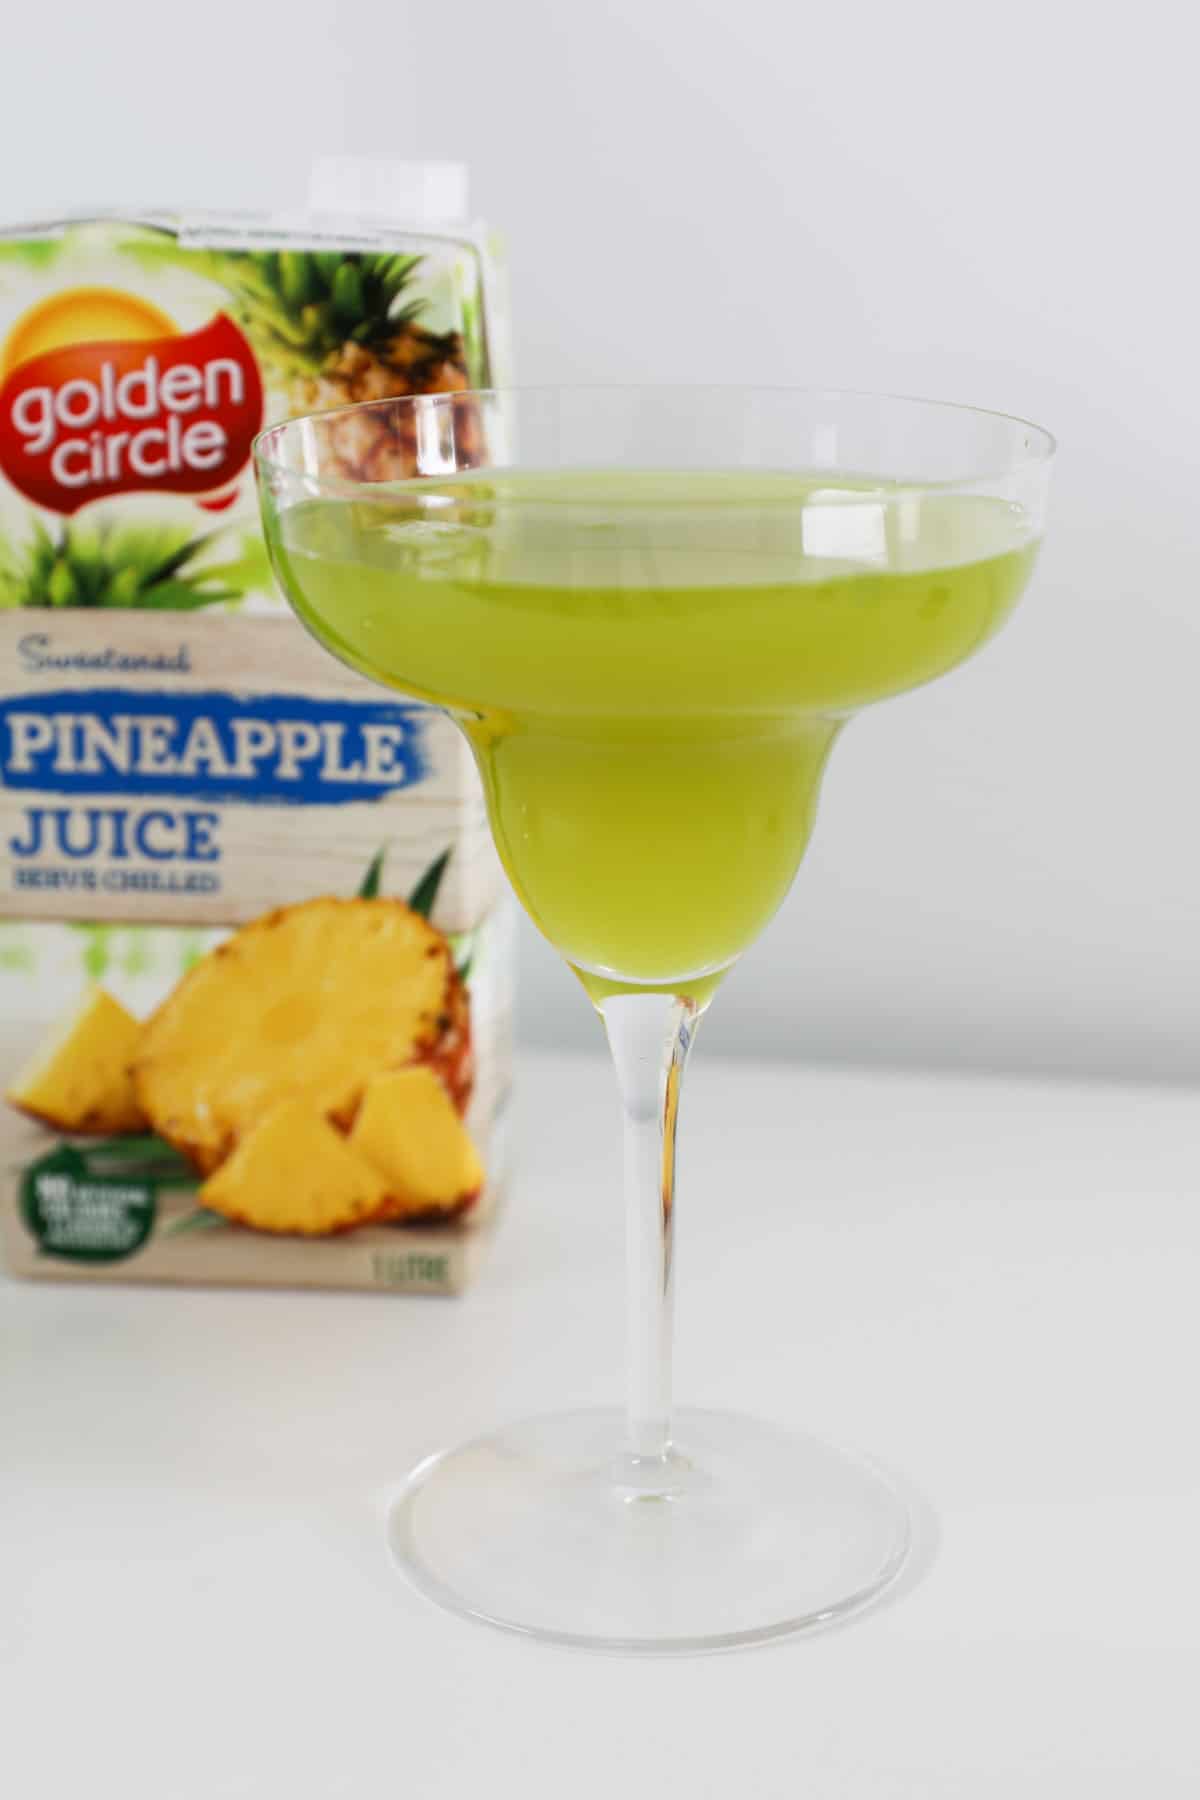 Pineapple juice behind a green cocktail.